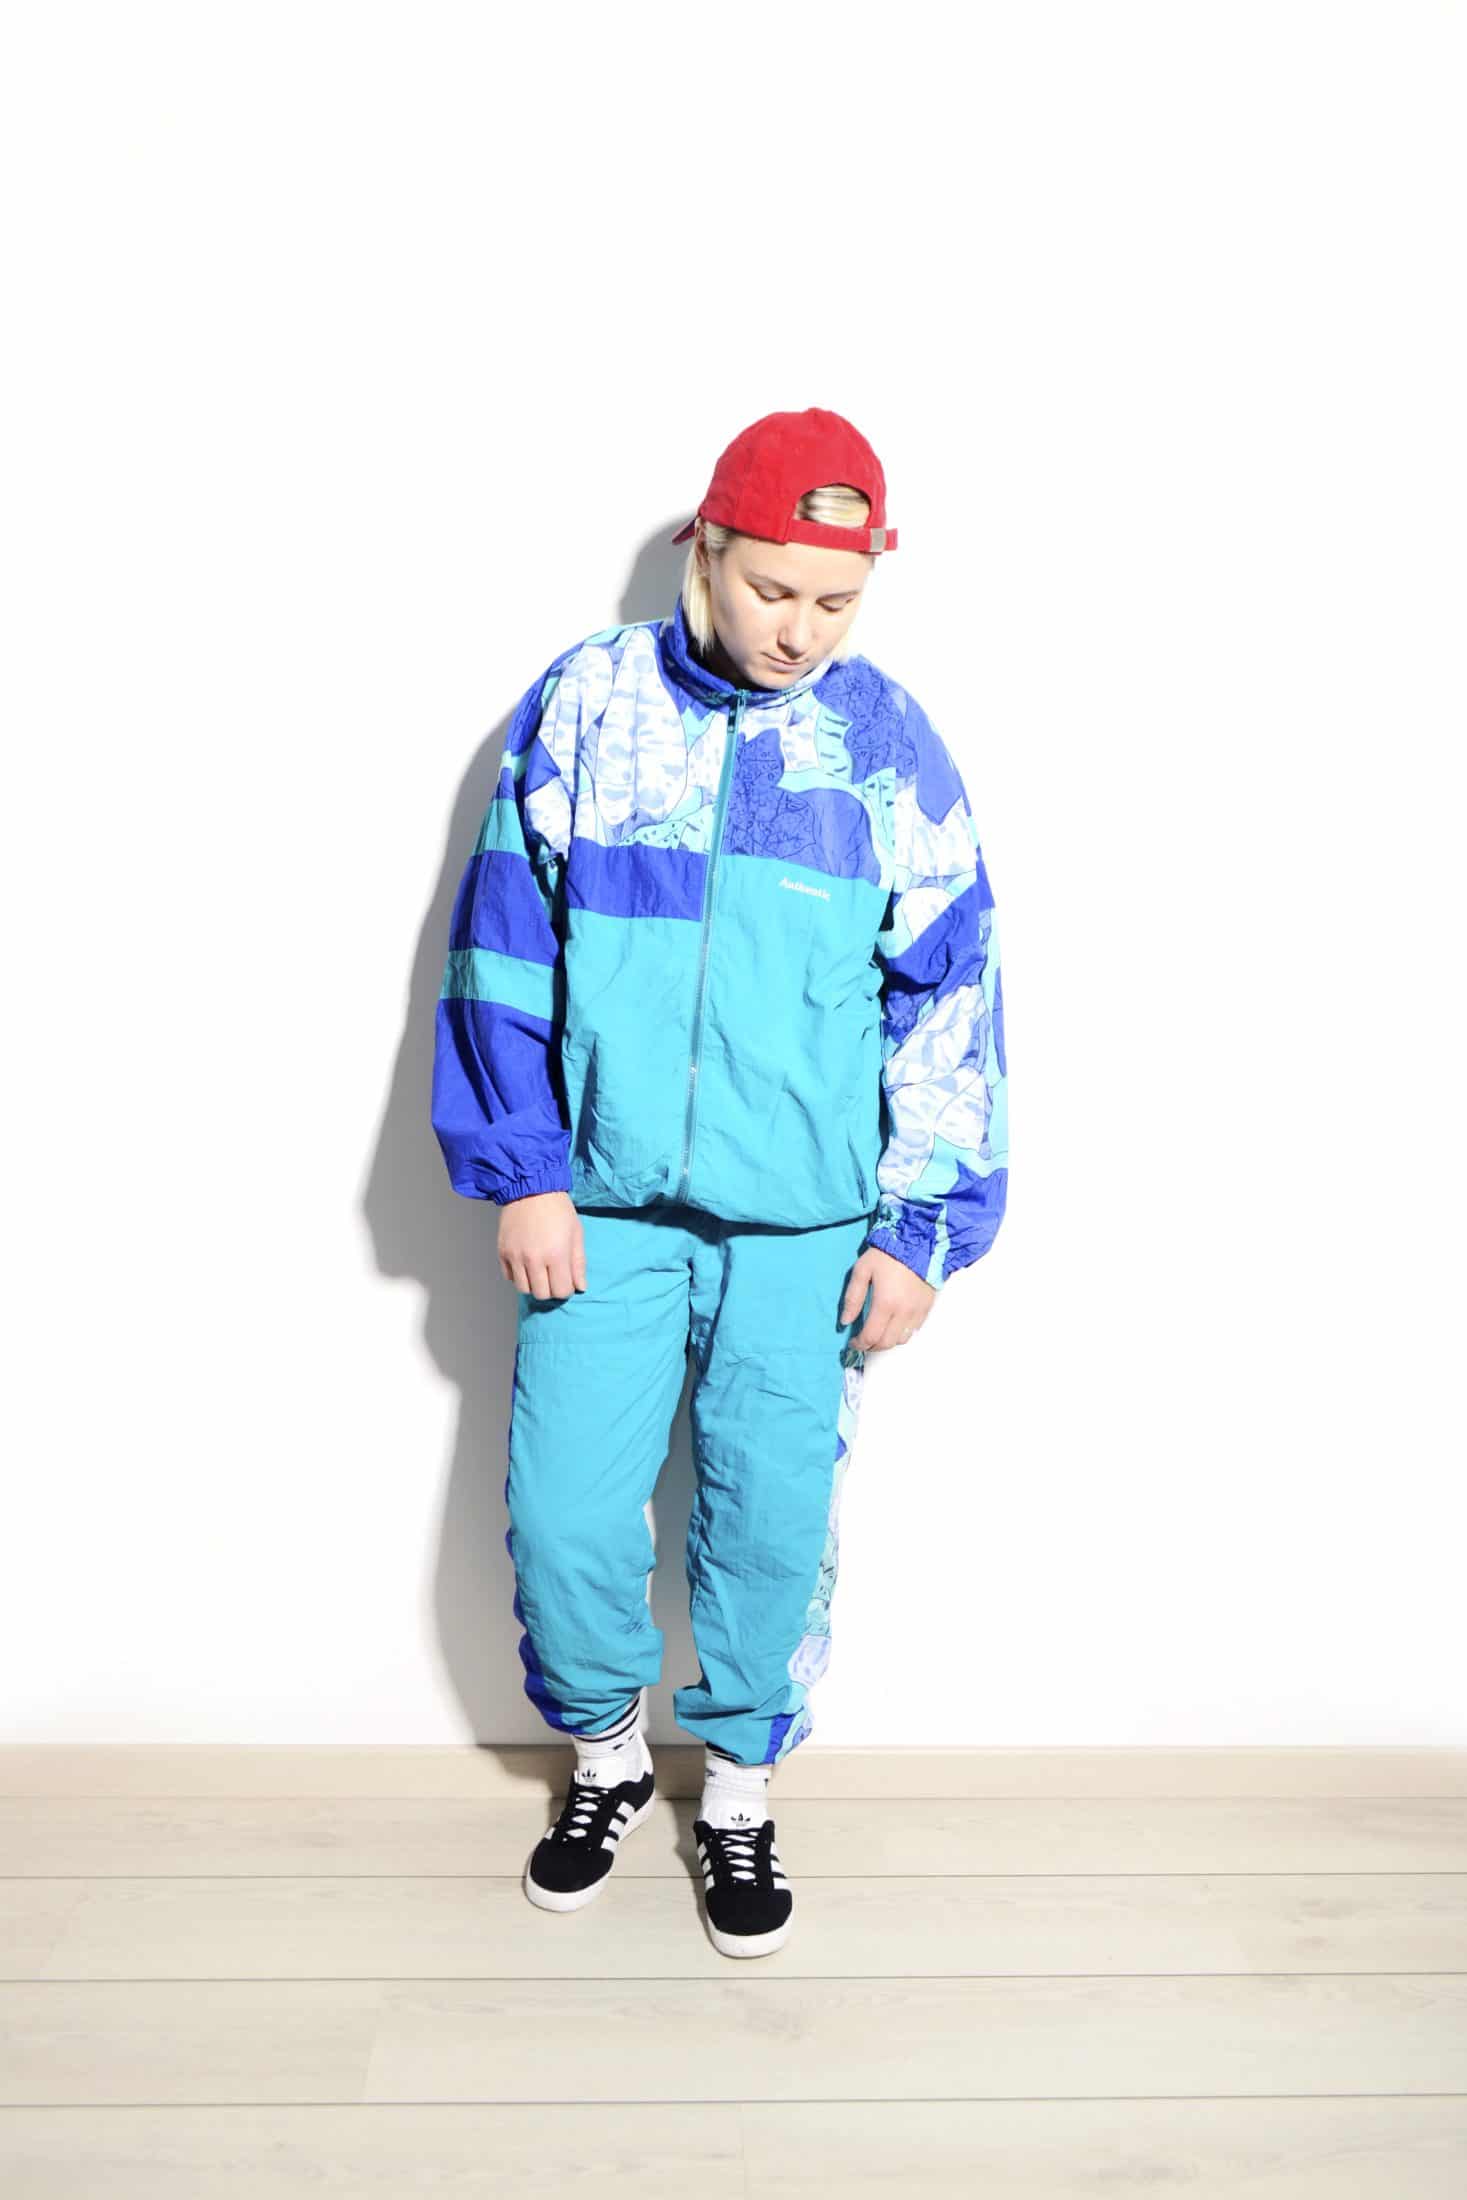 Vintage 90s shellsuit | Vintage clothing online store | Free shipping